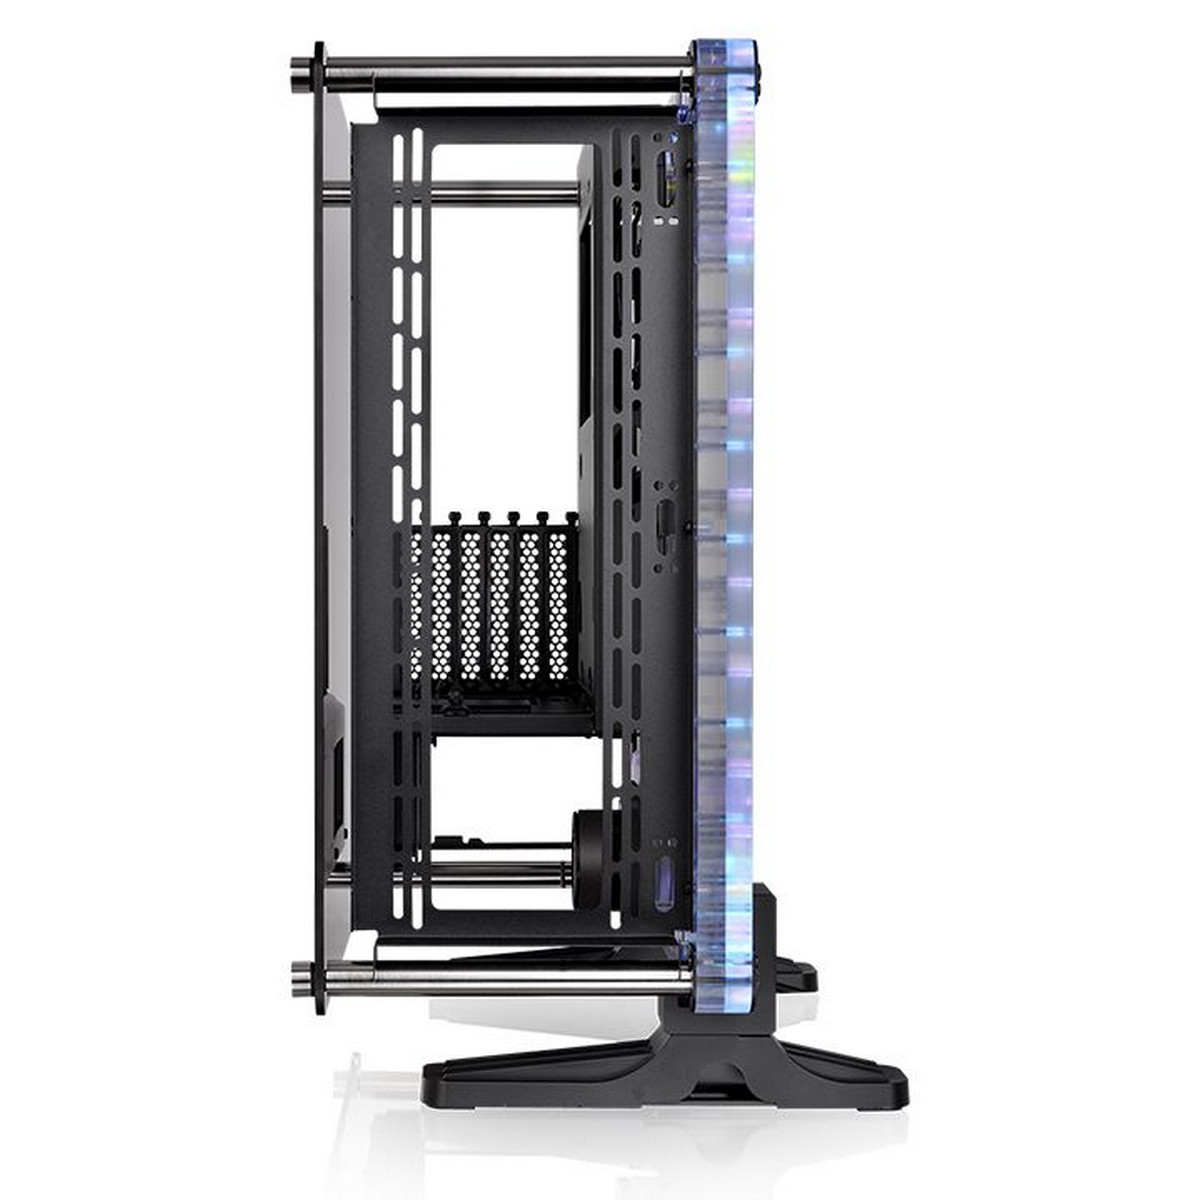 ThermalTake - Thermaltake DistroCas 350P Mid Tower Chassis